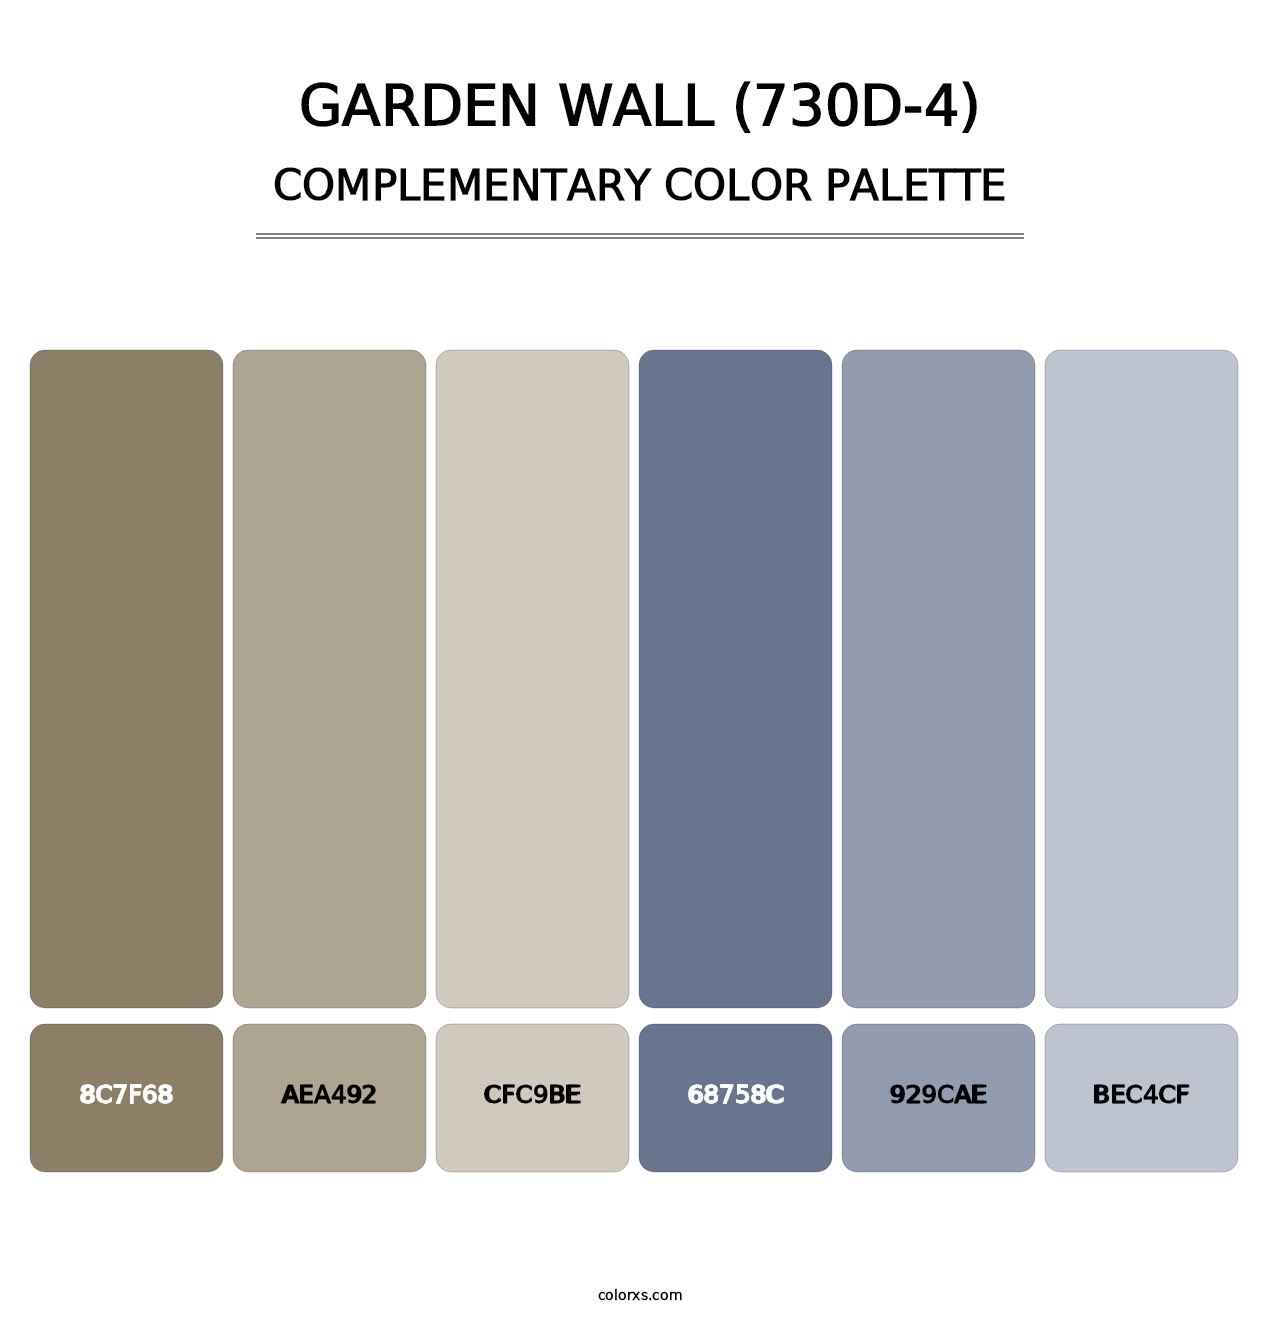 Garden Wall (730D-4) - Complementary Color Palette